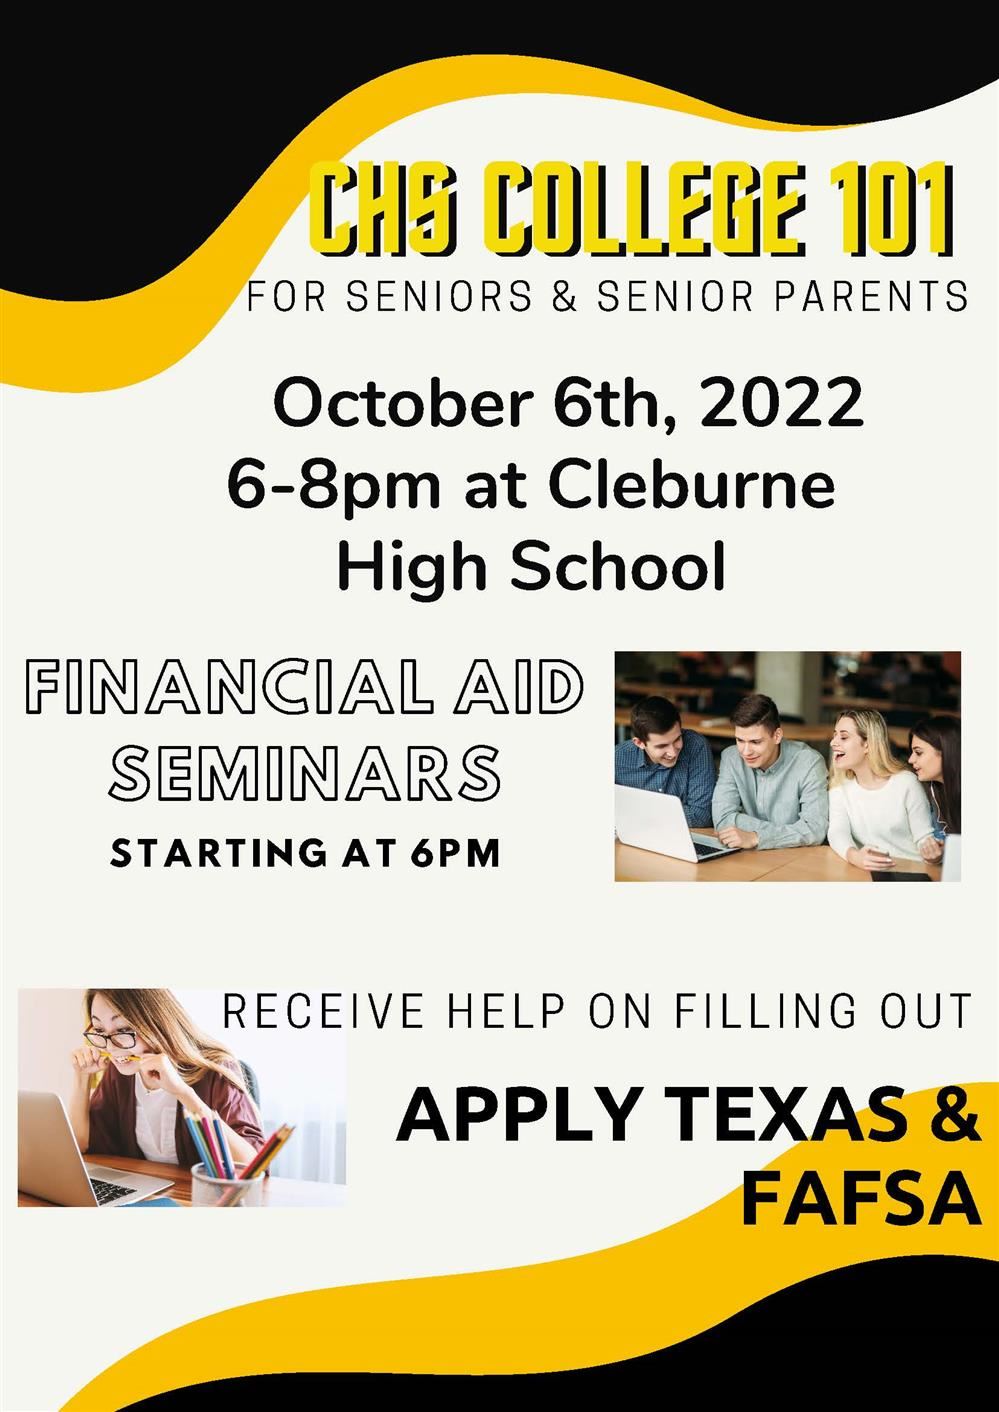 College 101 for all seniors and parents. October 6, 2022 from 6-8PM at CHS. Get help filling our FAFSA and Apply Texas